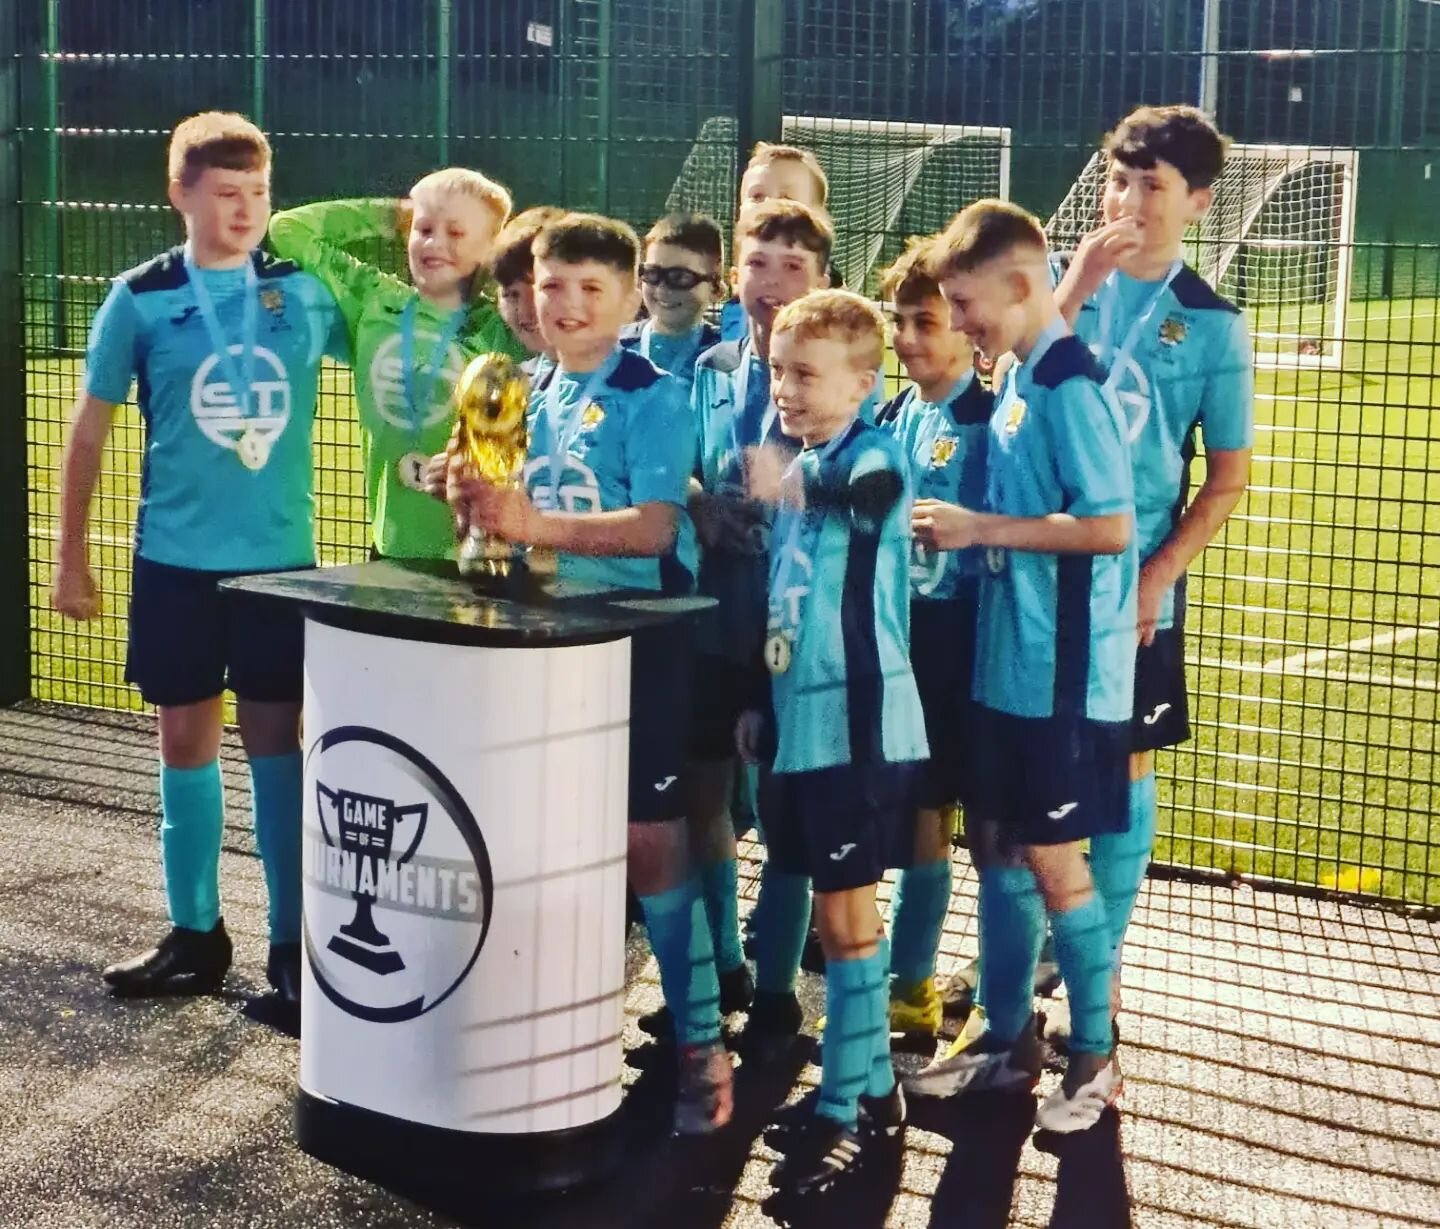 Congratulations to Consett Mayhem &amp; the French team on winning the u12 Junior world Cup!

We hope you had a great afternoon!

www.gameoftournaments.co.uk